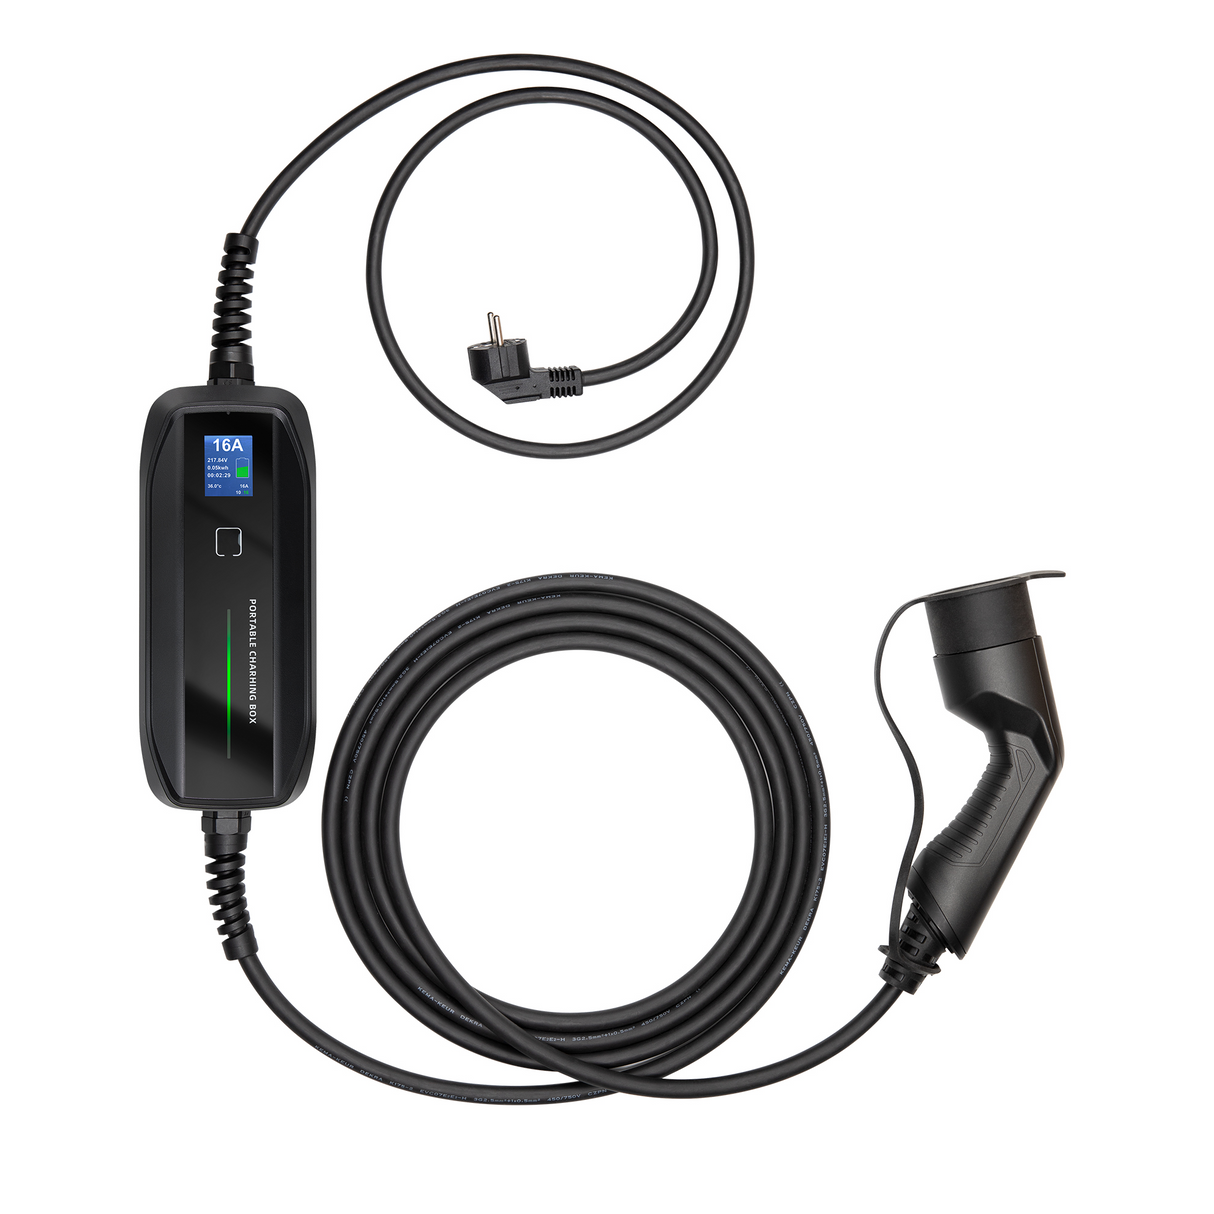 Mobile Charger Skoda CITIGOe iV - Besen with LCD - Type 2 to Schuko